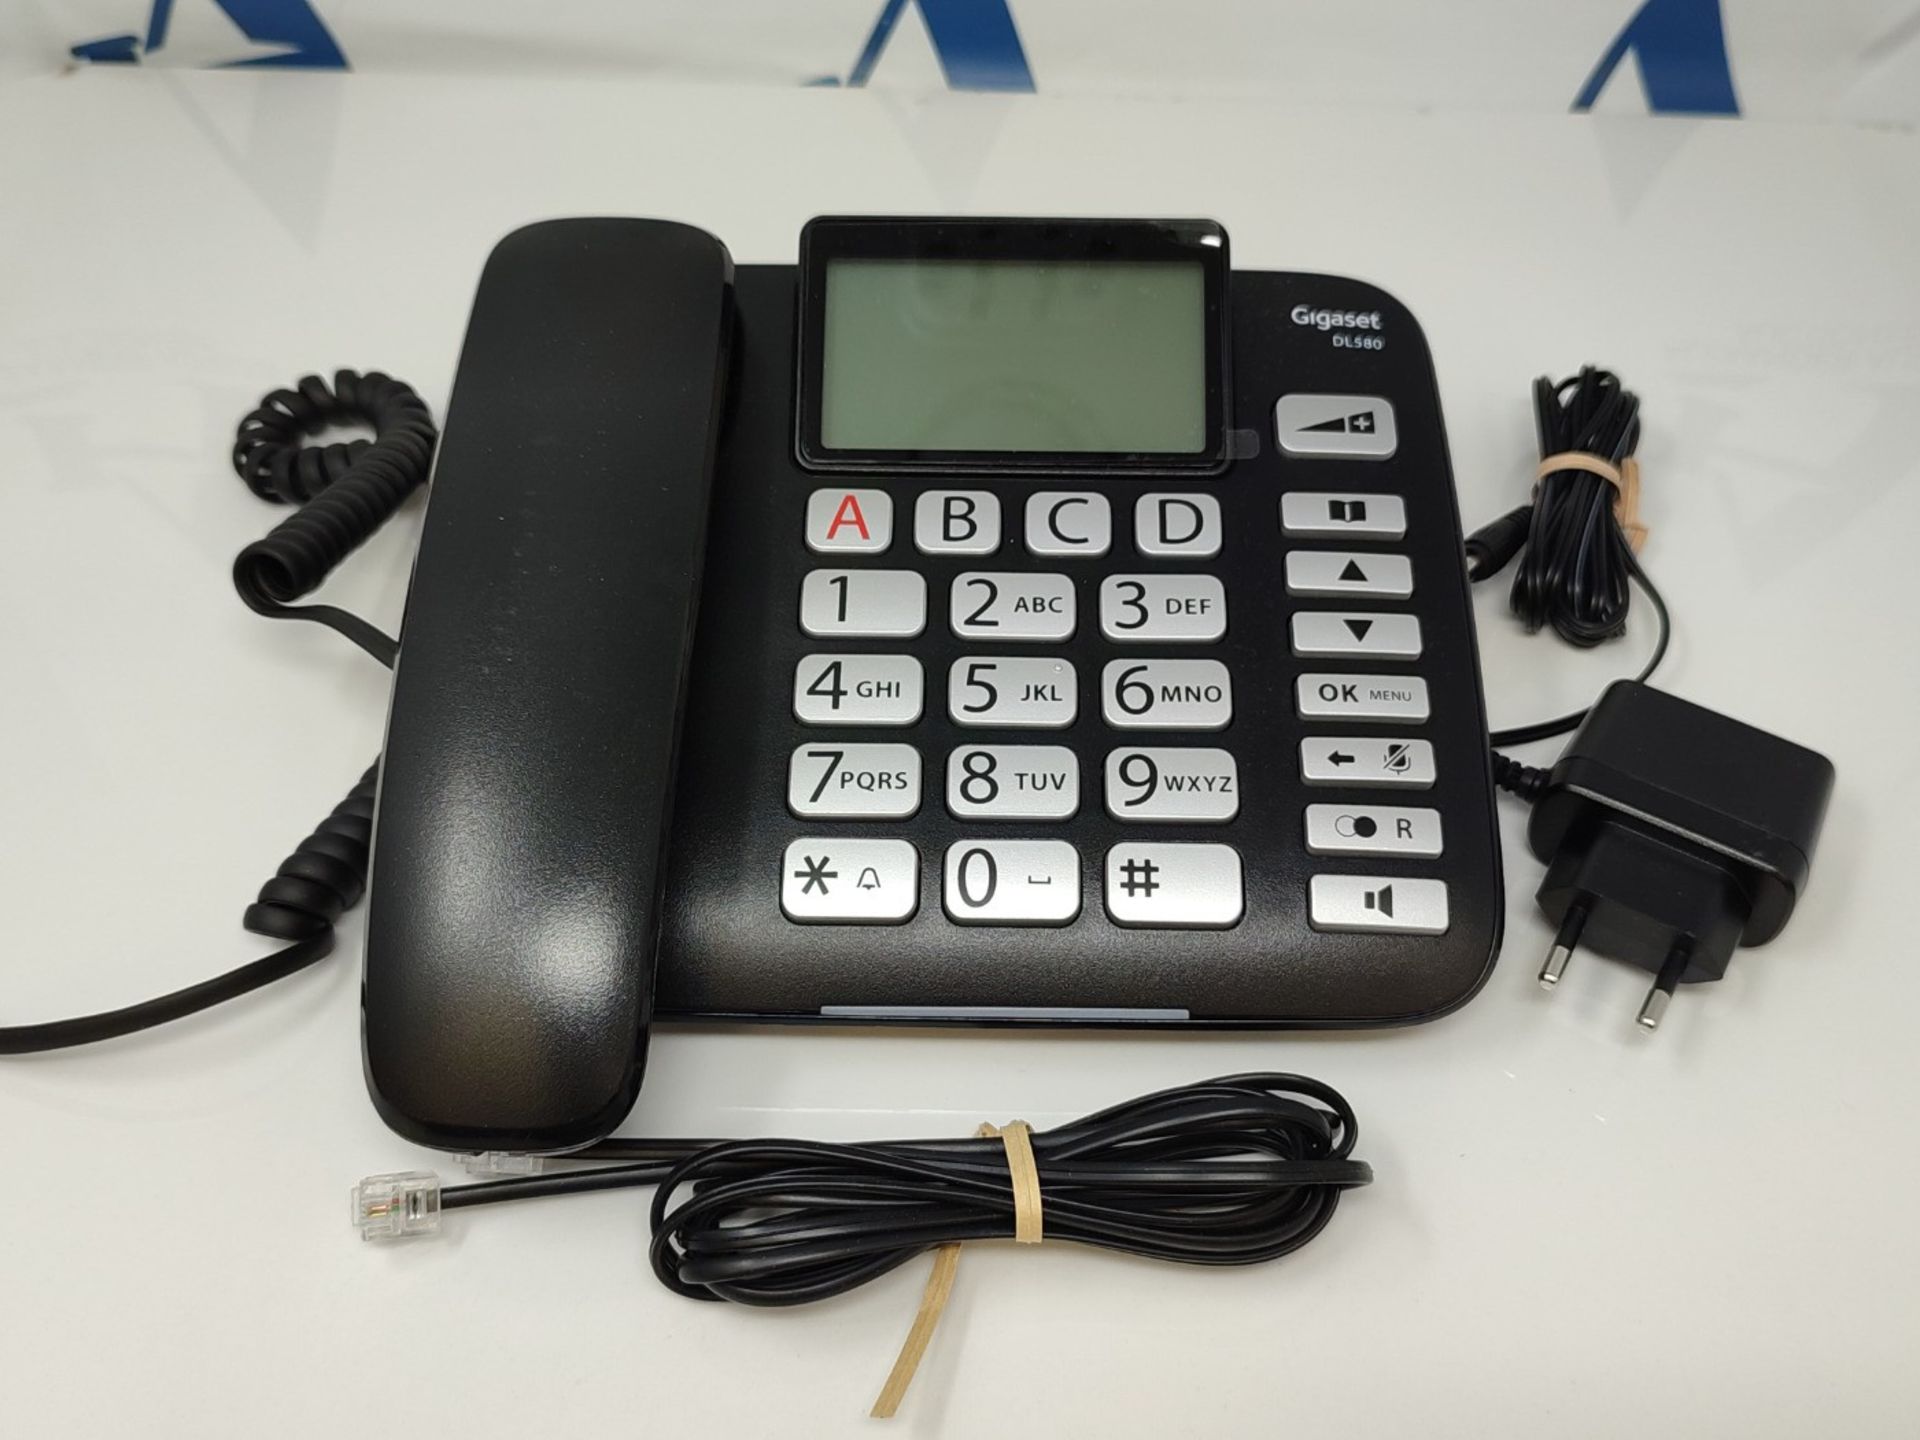 Gigaset DL580 Corded Telephone Black [French Version] - Image 5 of 6